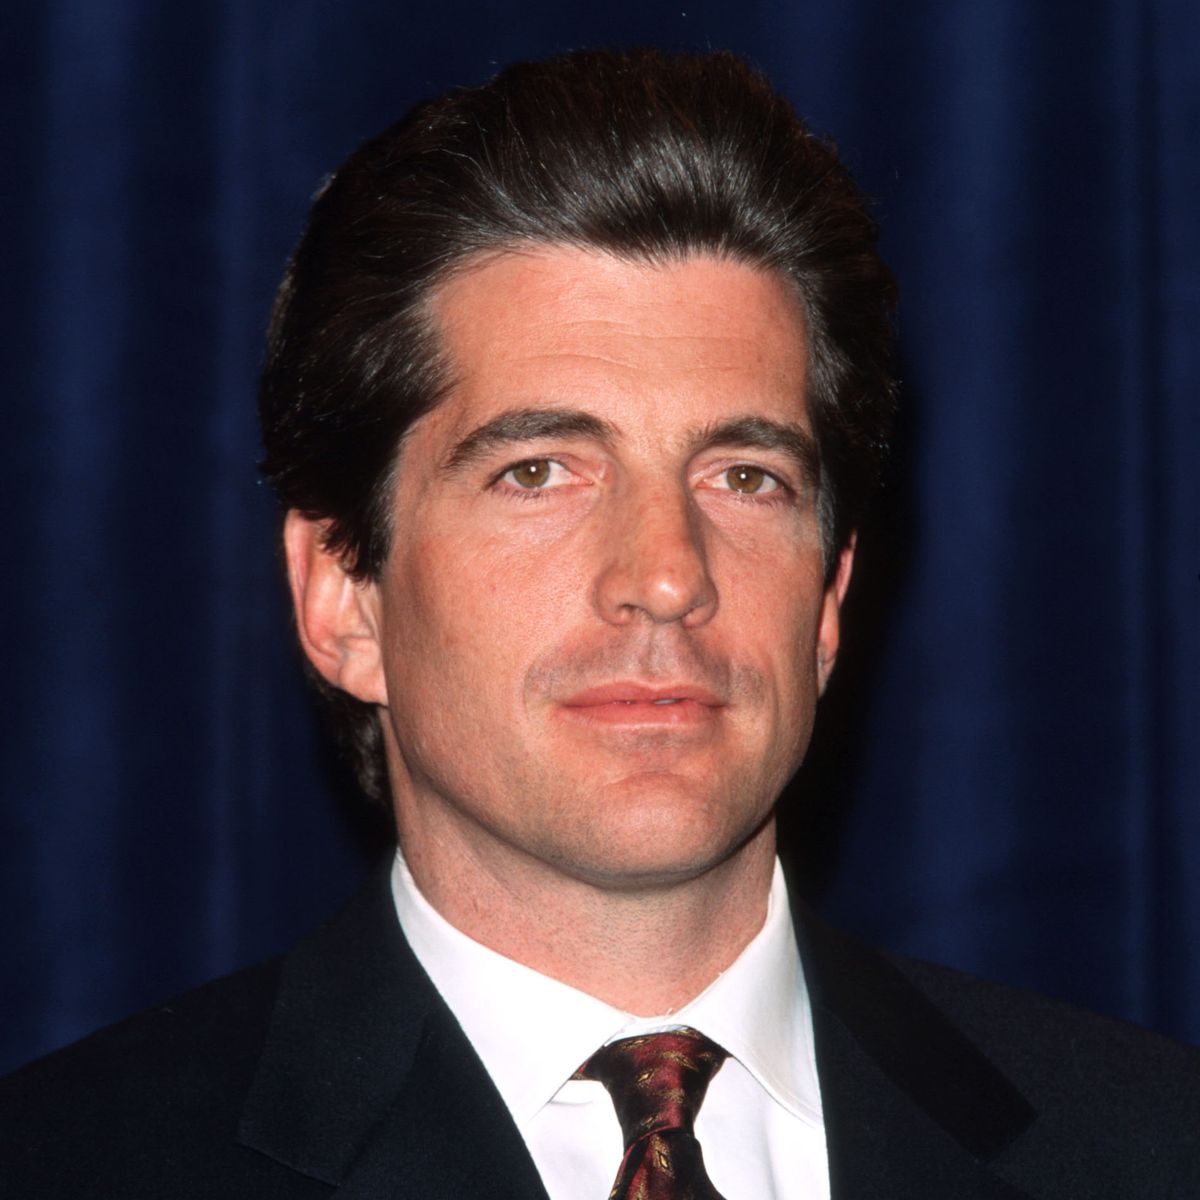 Robie Awards Dinner Held At Waldorf-Astoria In New York City 347505 03: John F. Kennedy, Jr. poses for a picture March 8, 1999 at the Jackie Robinson Foundation Awards Dinner at the Waldorf-Astoria Hotel in New York City. The honorees are Chase Manhattan President Thomas G. Labrecque and California Congresswoman Maxine Waters. (Photo by Evan Agostini/Liaison)